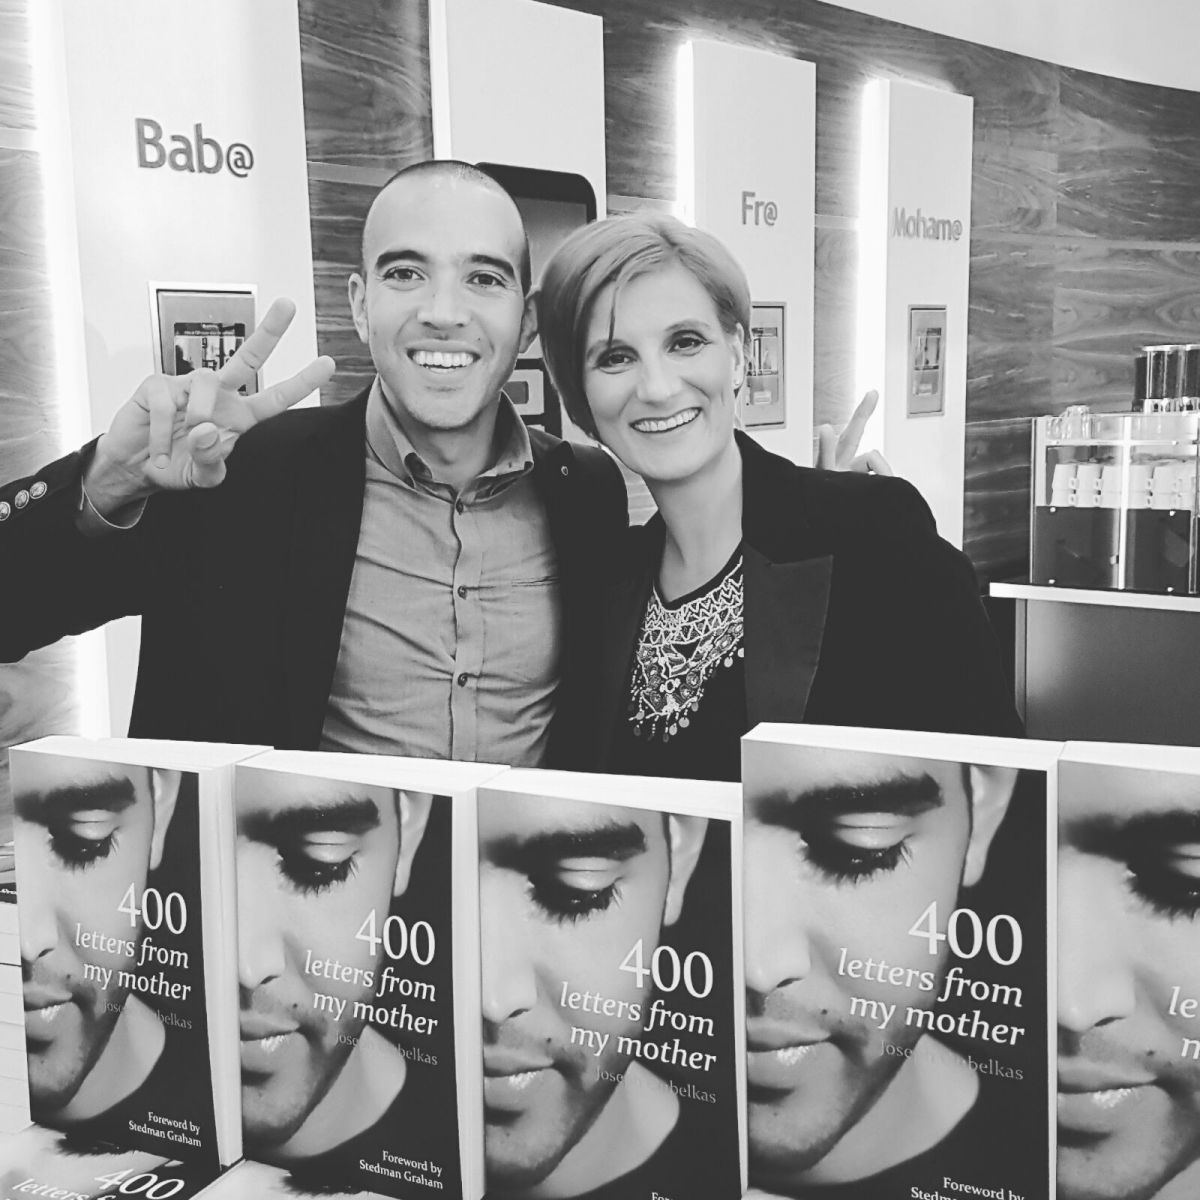 author Joseph Oubelkas and translator Anne Marie Westra at the book launch of 400 letters from my mother